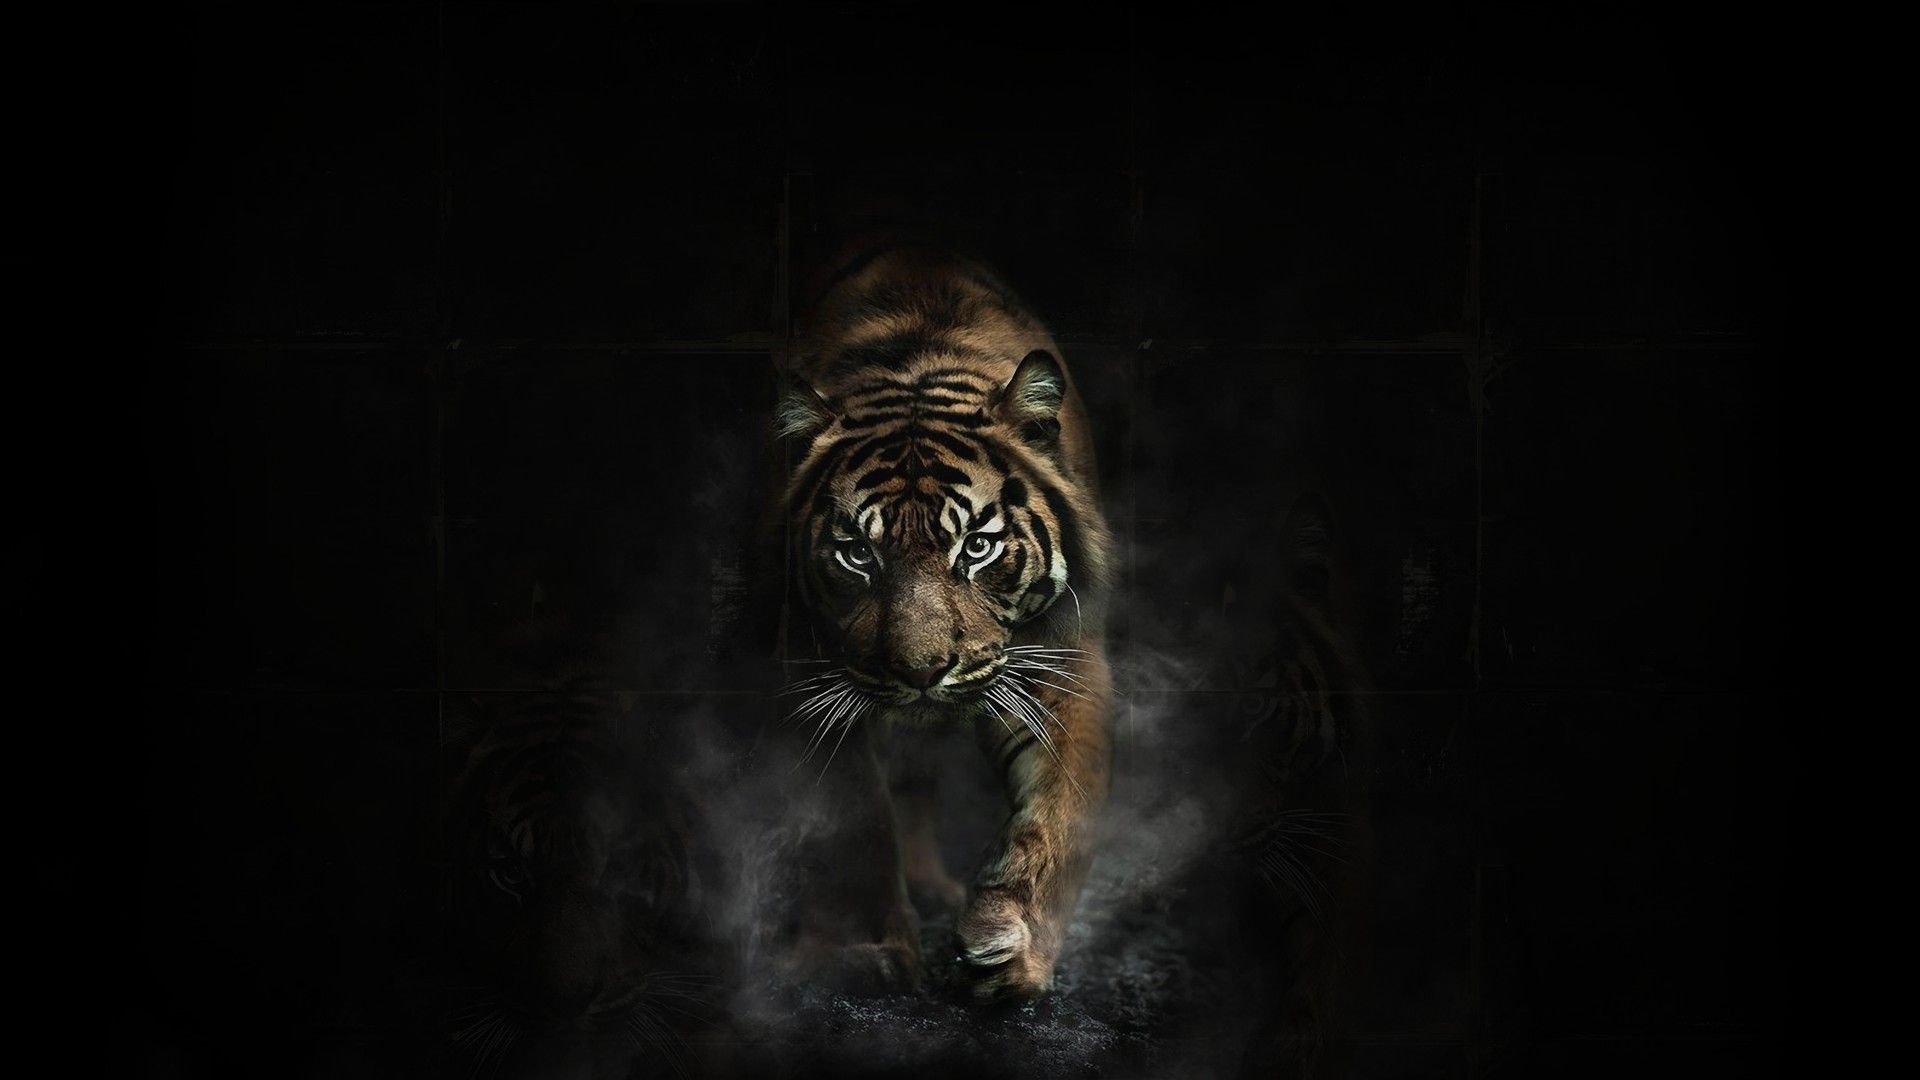 Tiger wallpaperDownload free awesome High Resolution